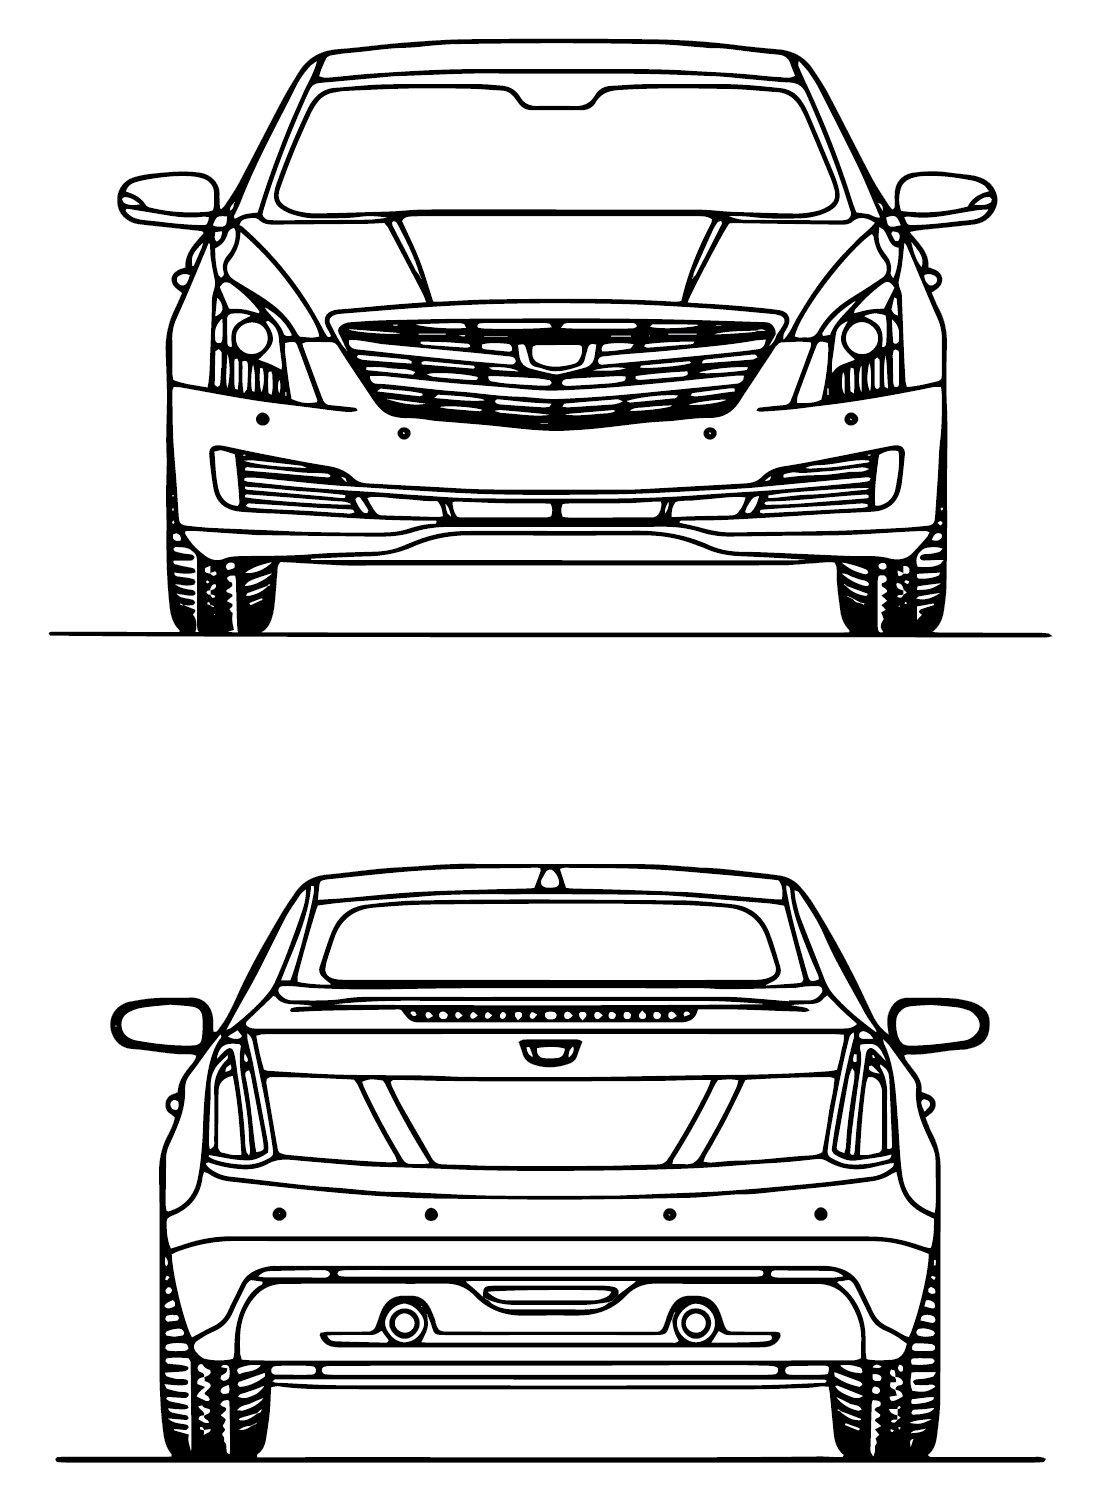 Cadillac ATS Coupe Coloring Page from Cadillac